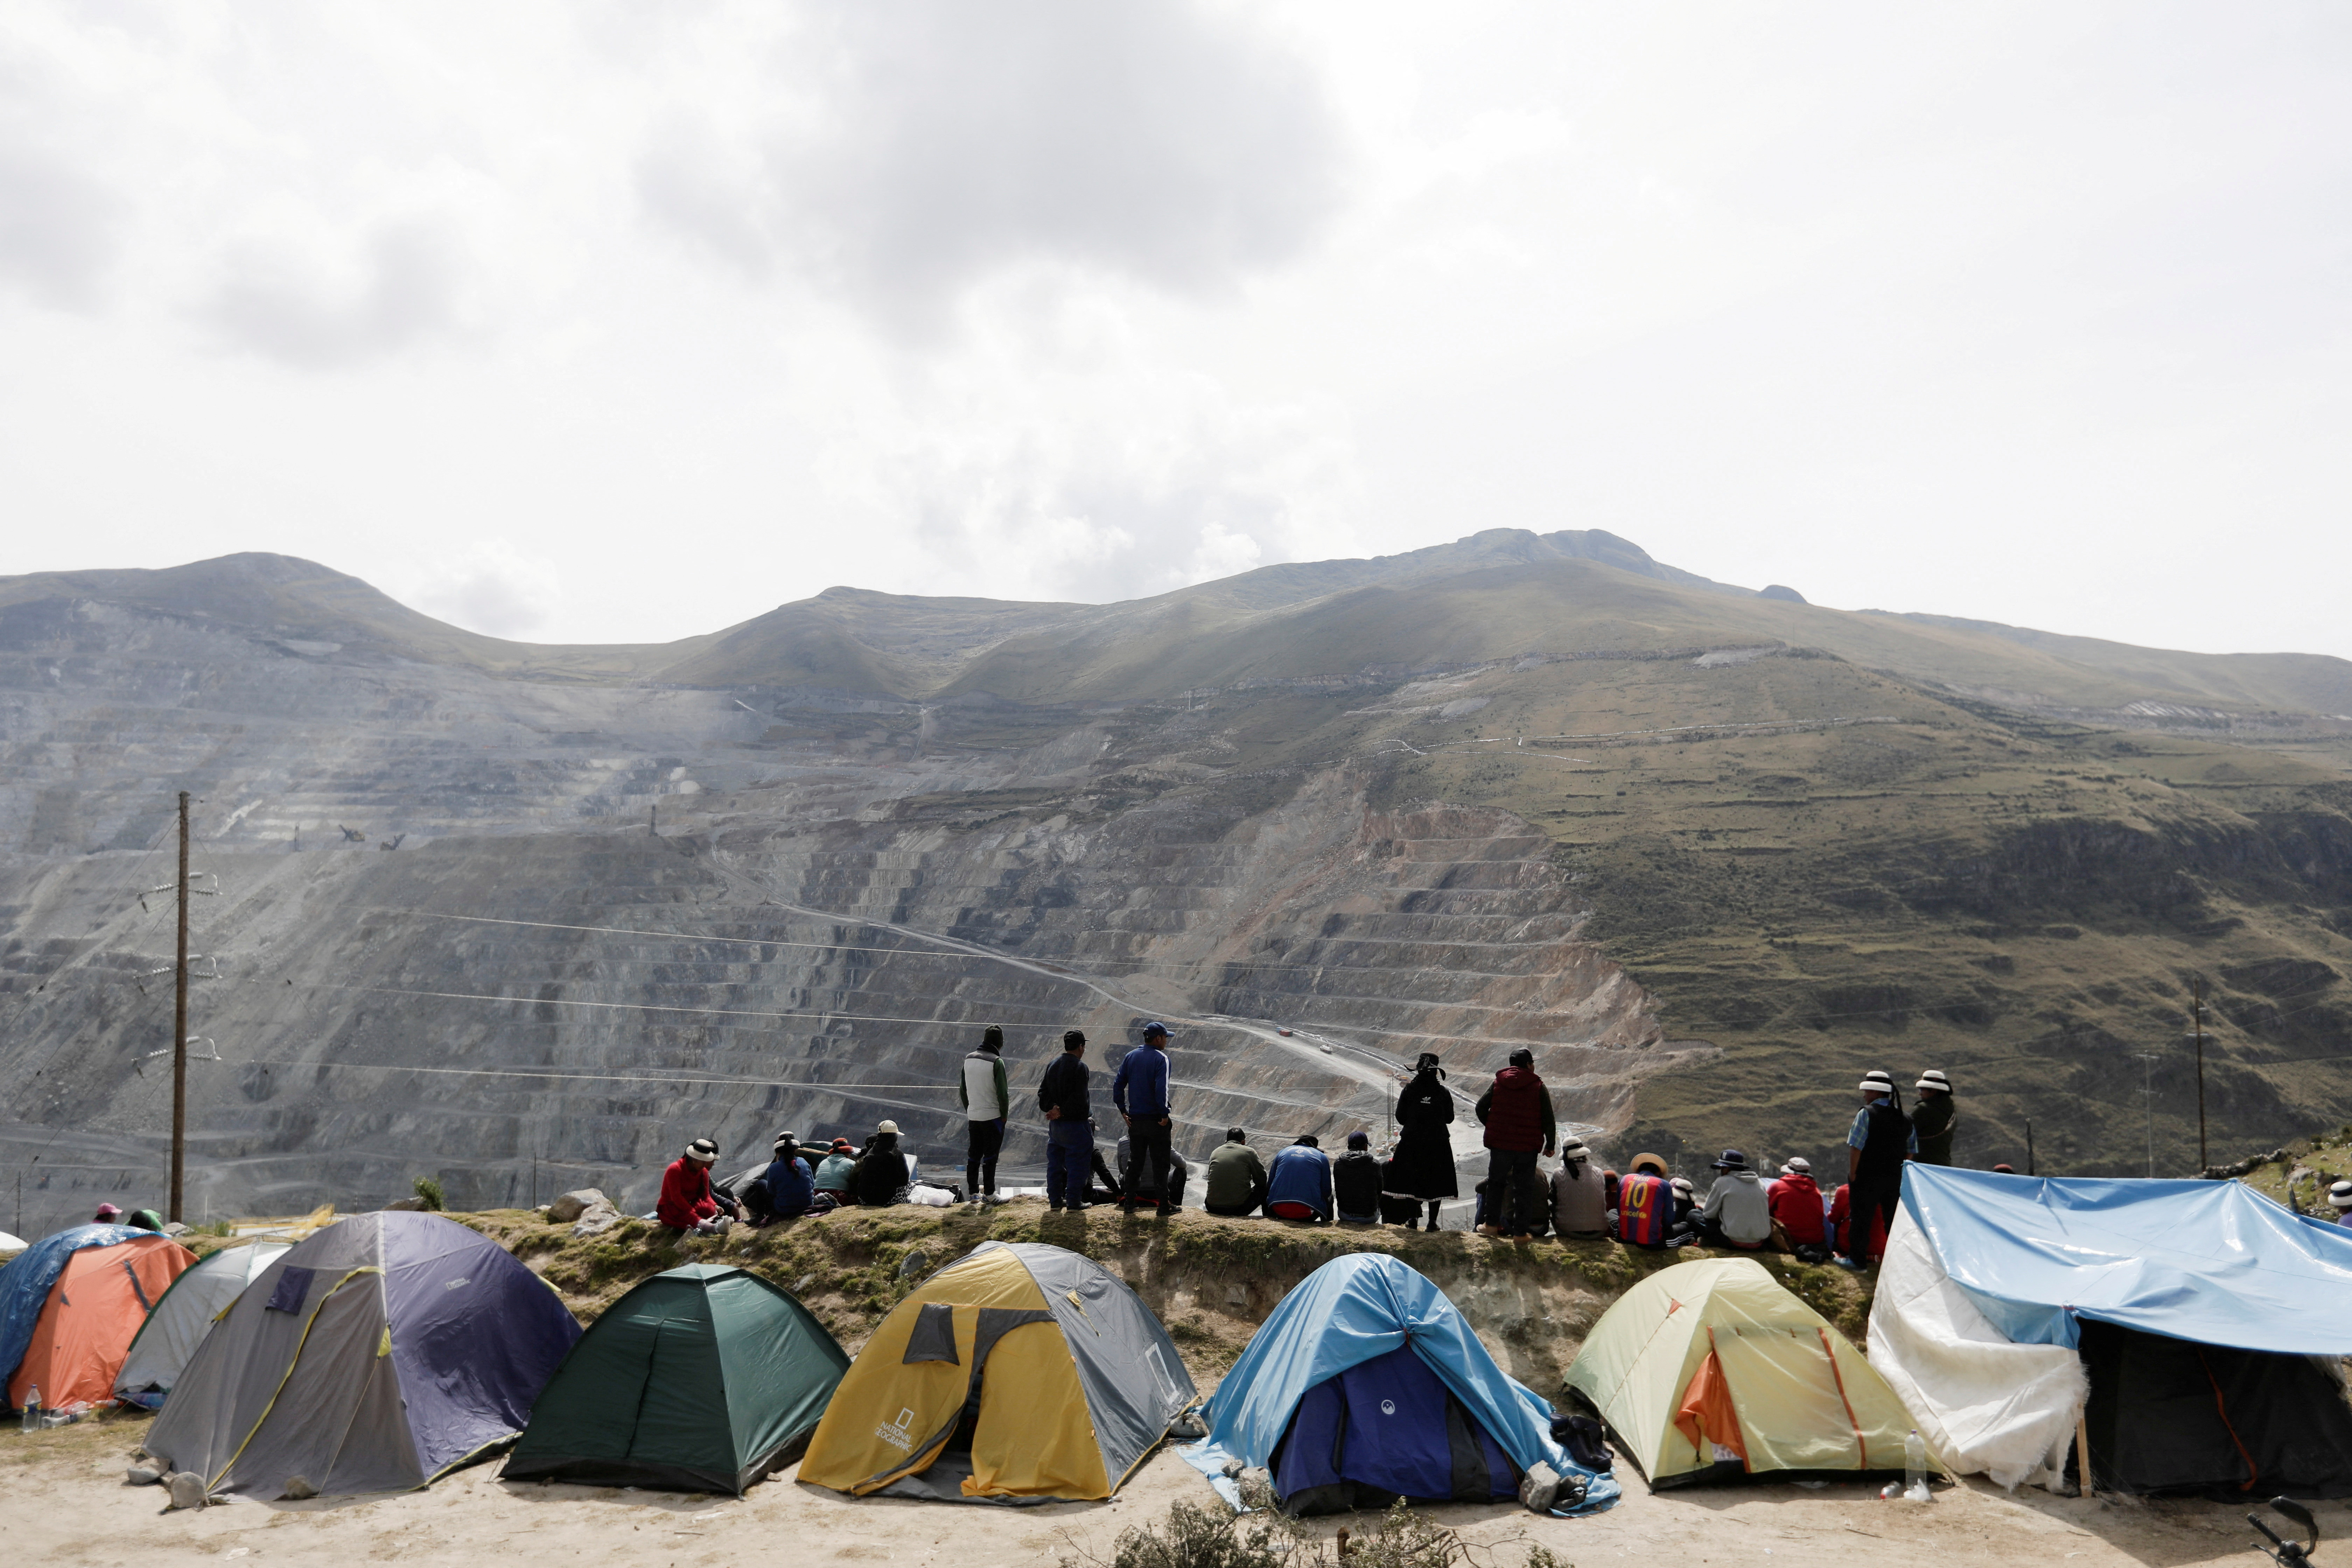 Peru communities camp on the property of Las Bambas copper mine